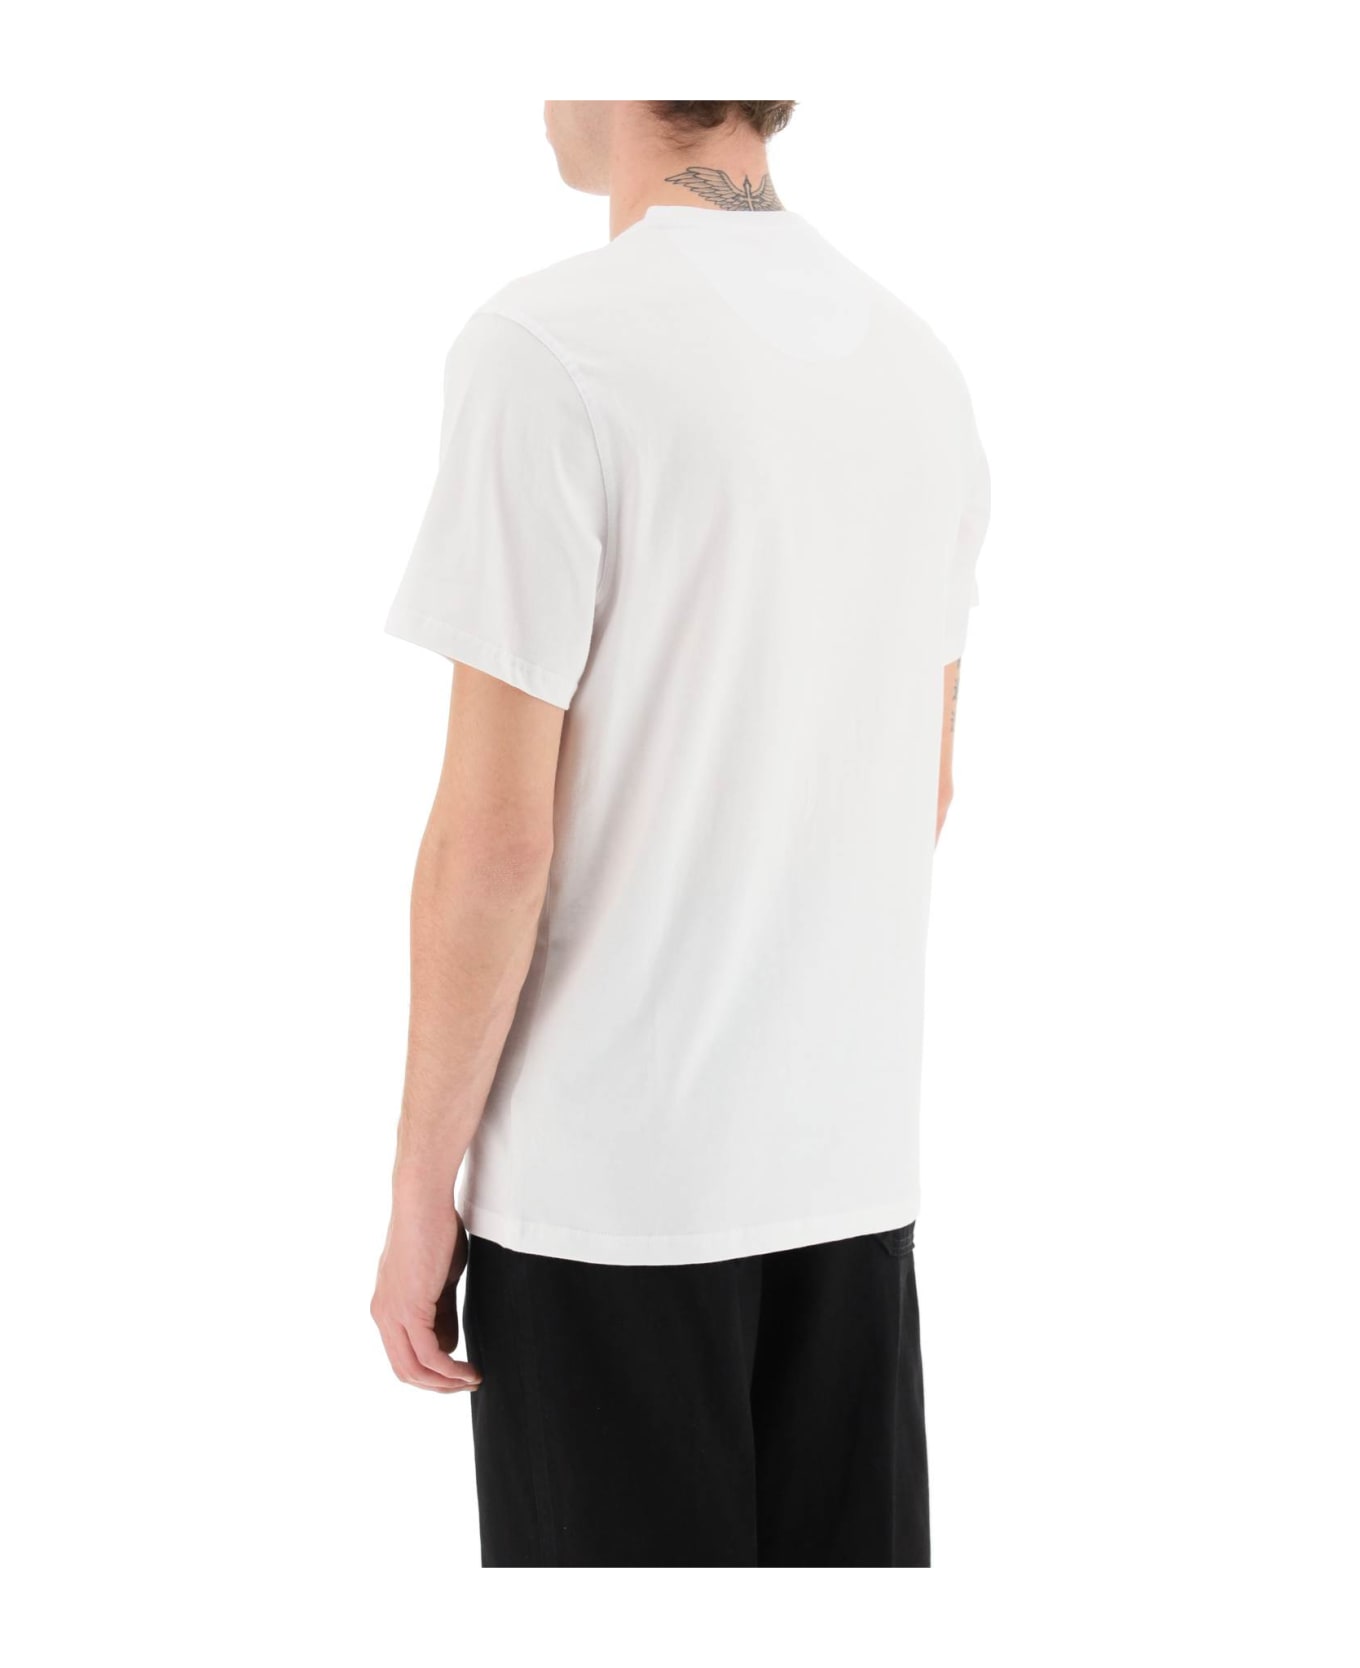 Barbour Classic Chest Pocket T-shirt - WHITE シャツ